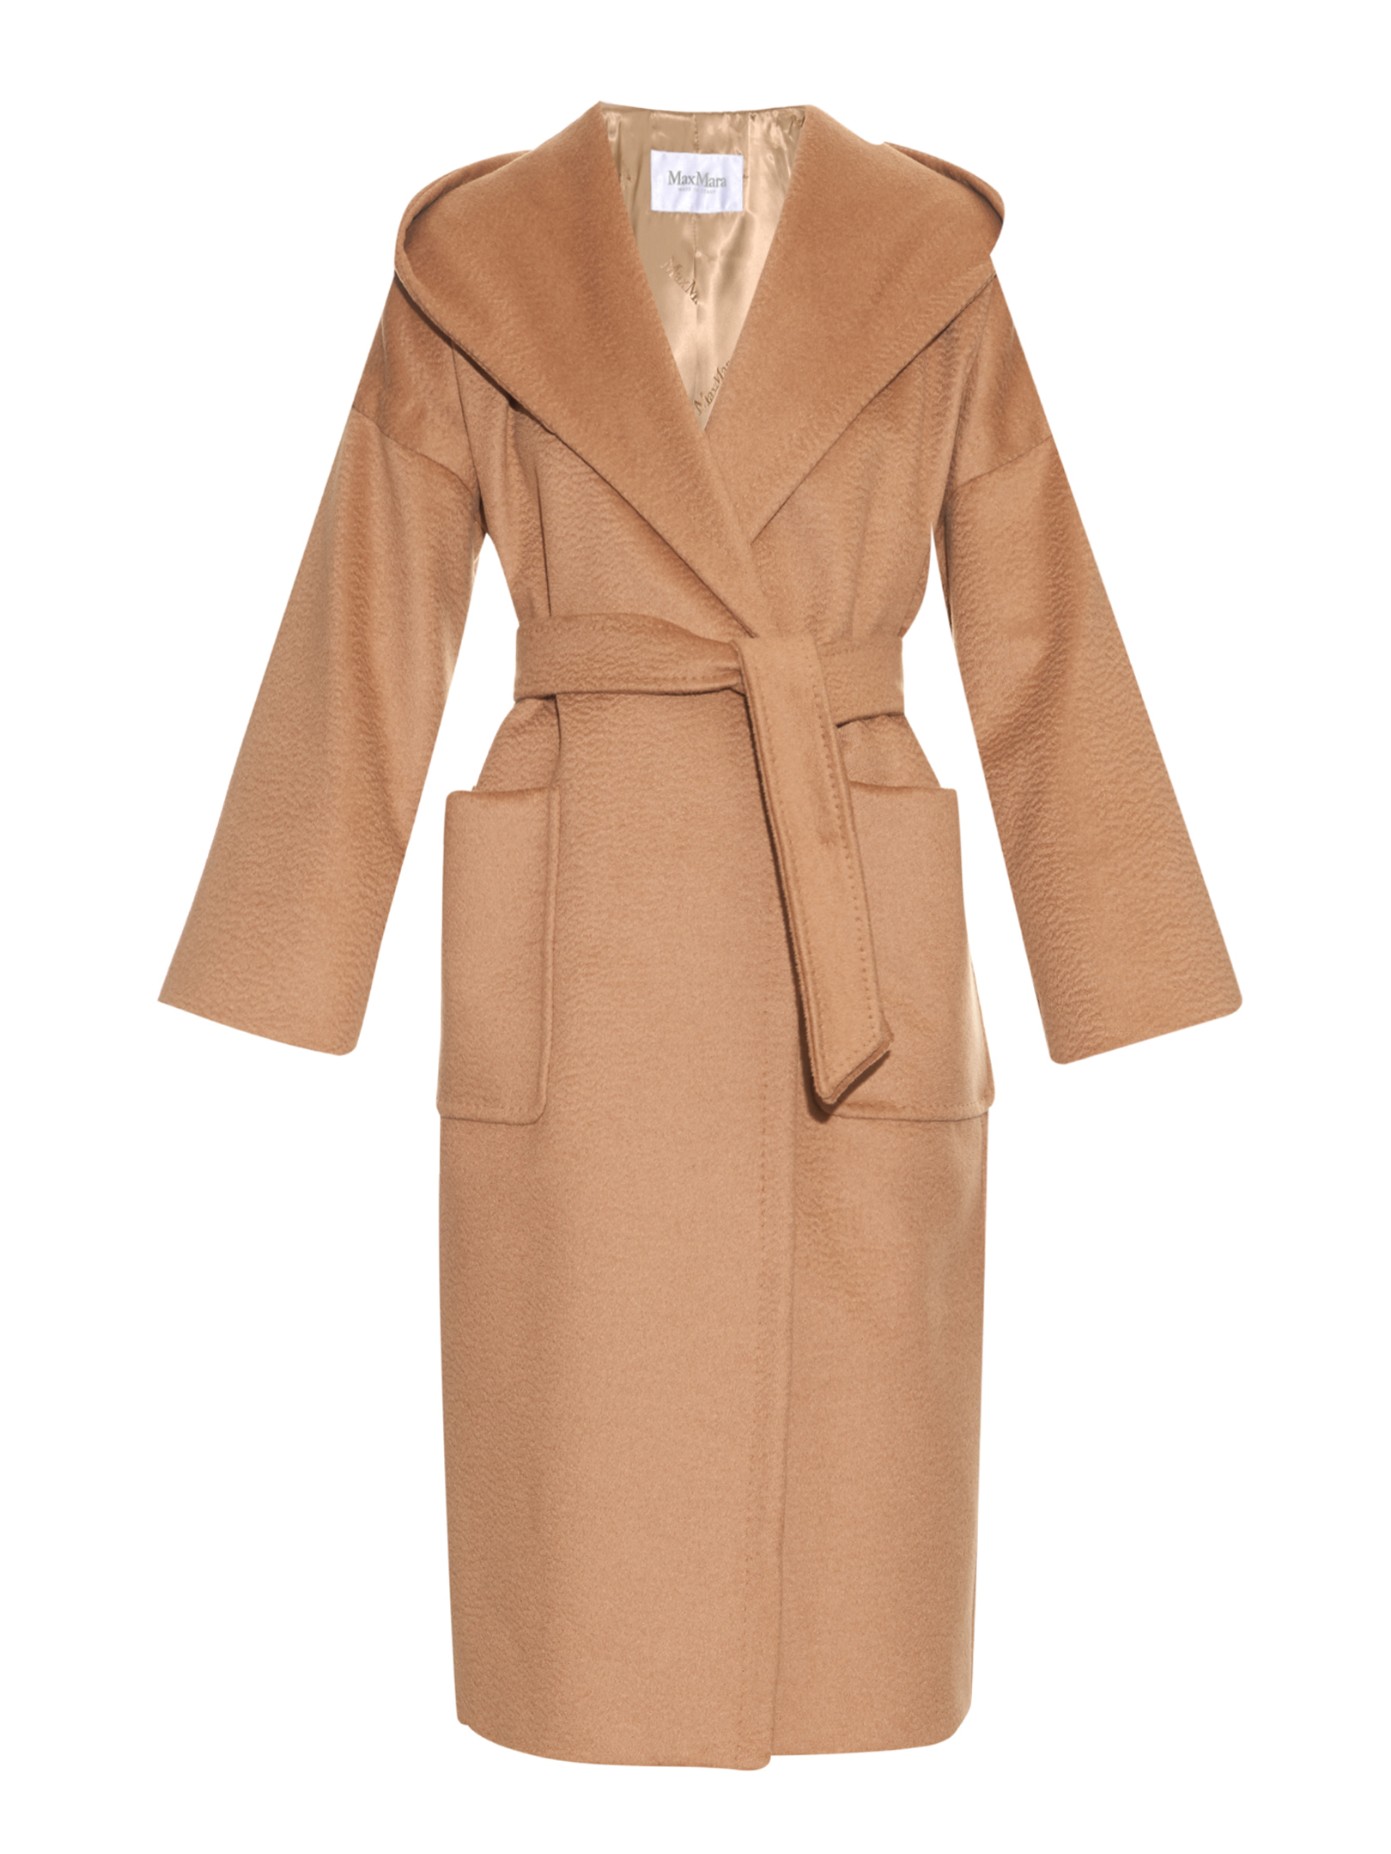 Shopping: More Coats, Jackets & Capes for Autumn Days